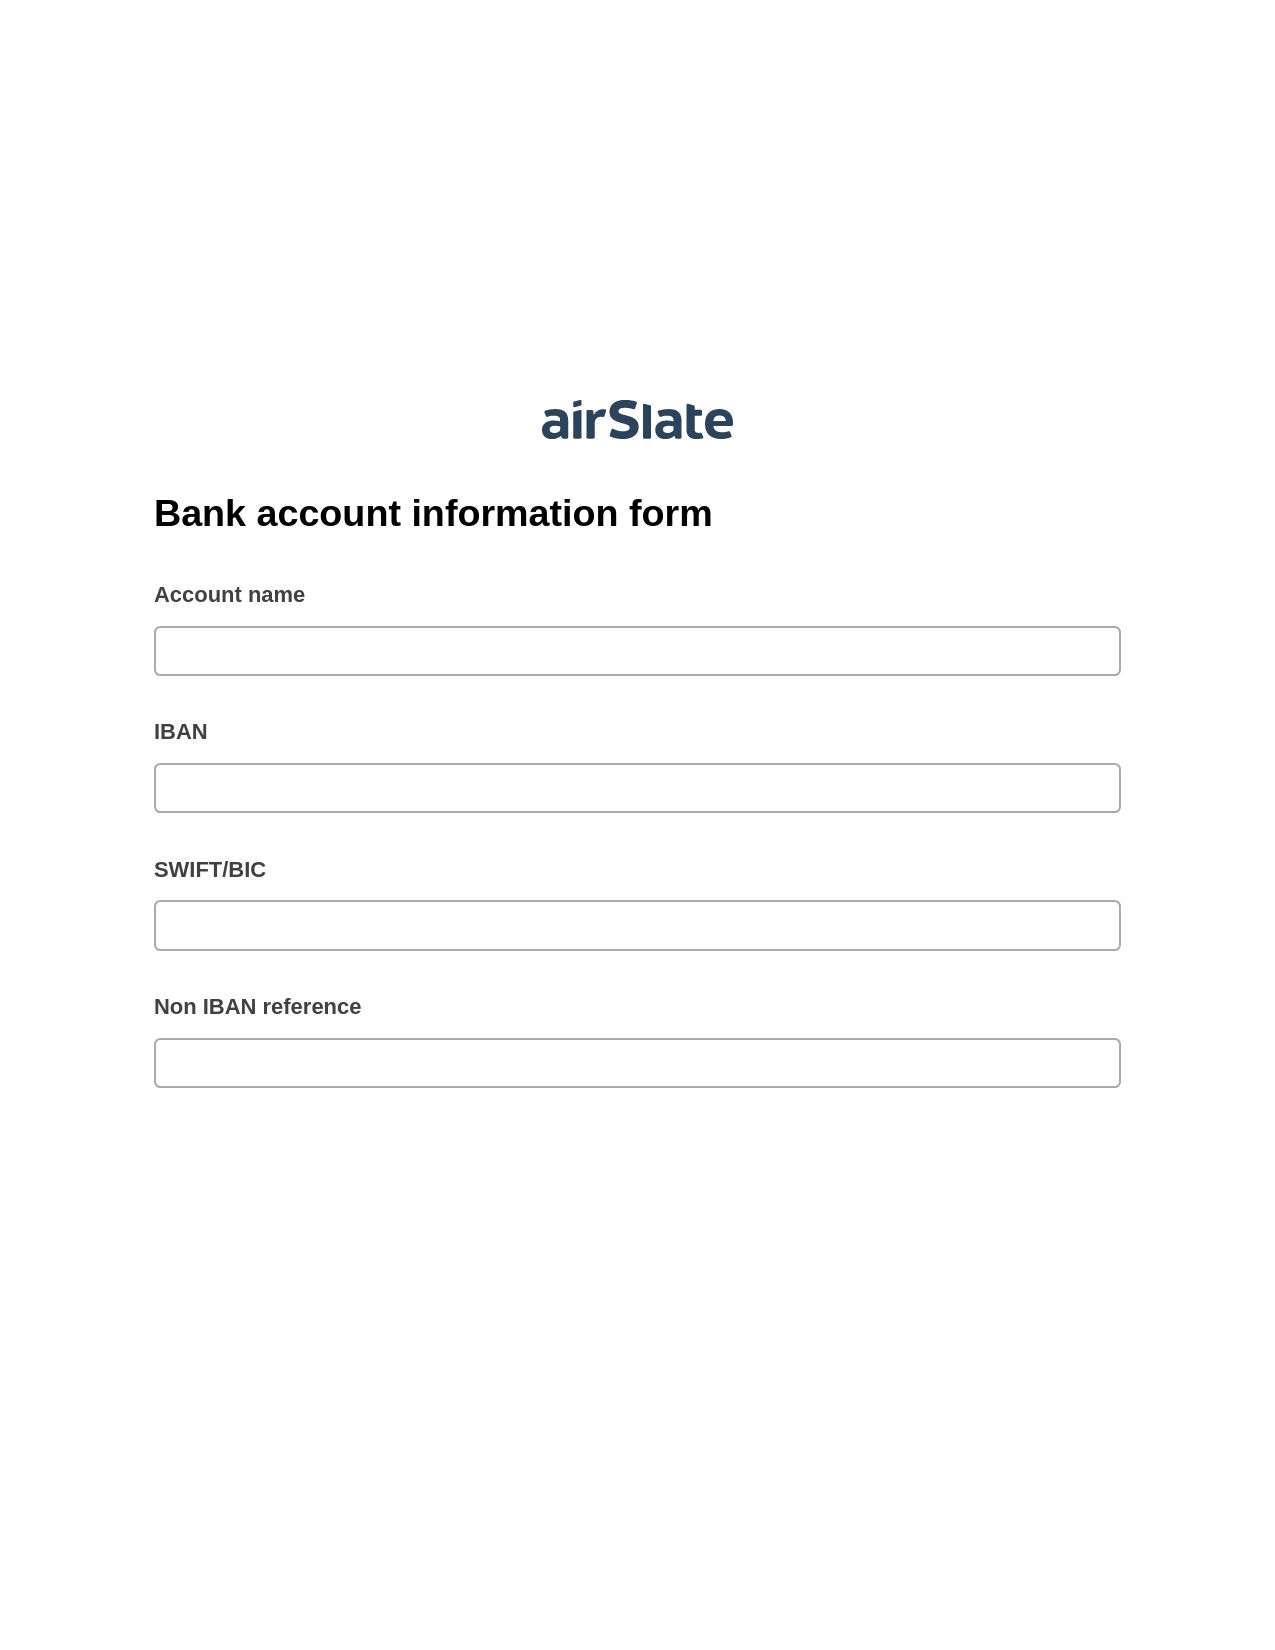 Multirole Bank account information form Pre-fill from CSV File Bot, Document Hide Bot, Google Drive Bot